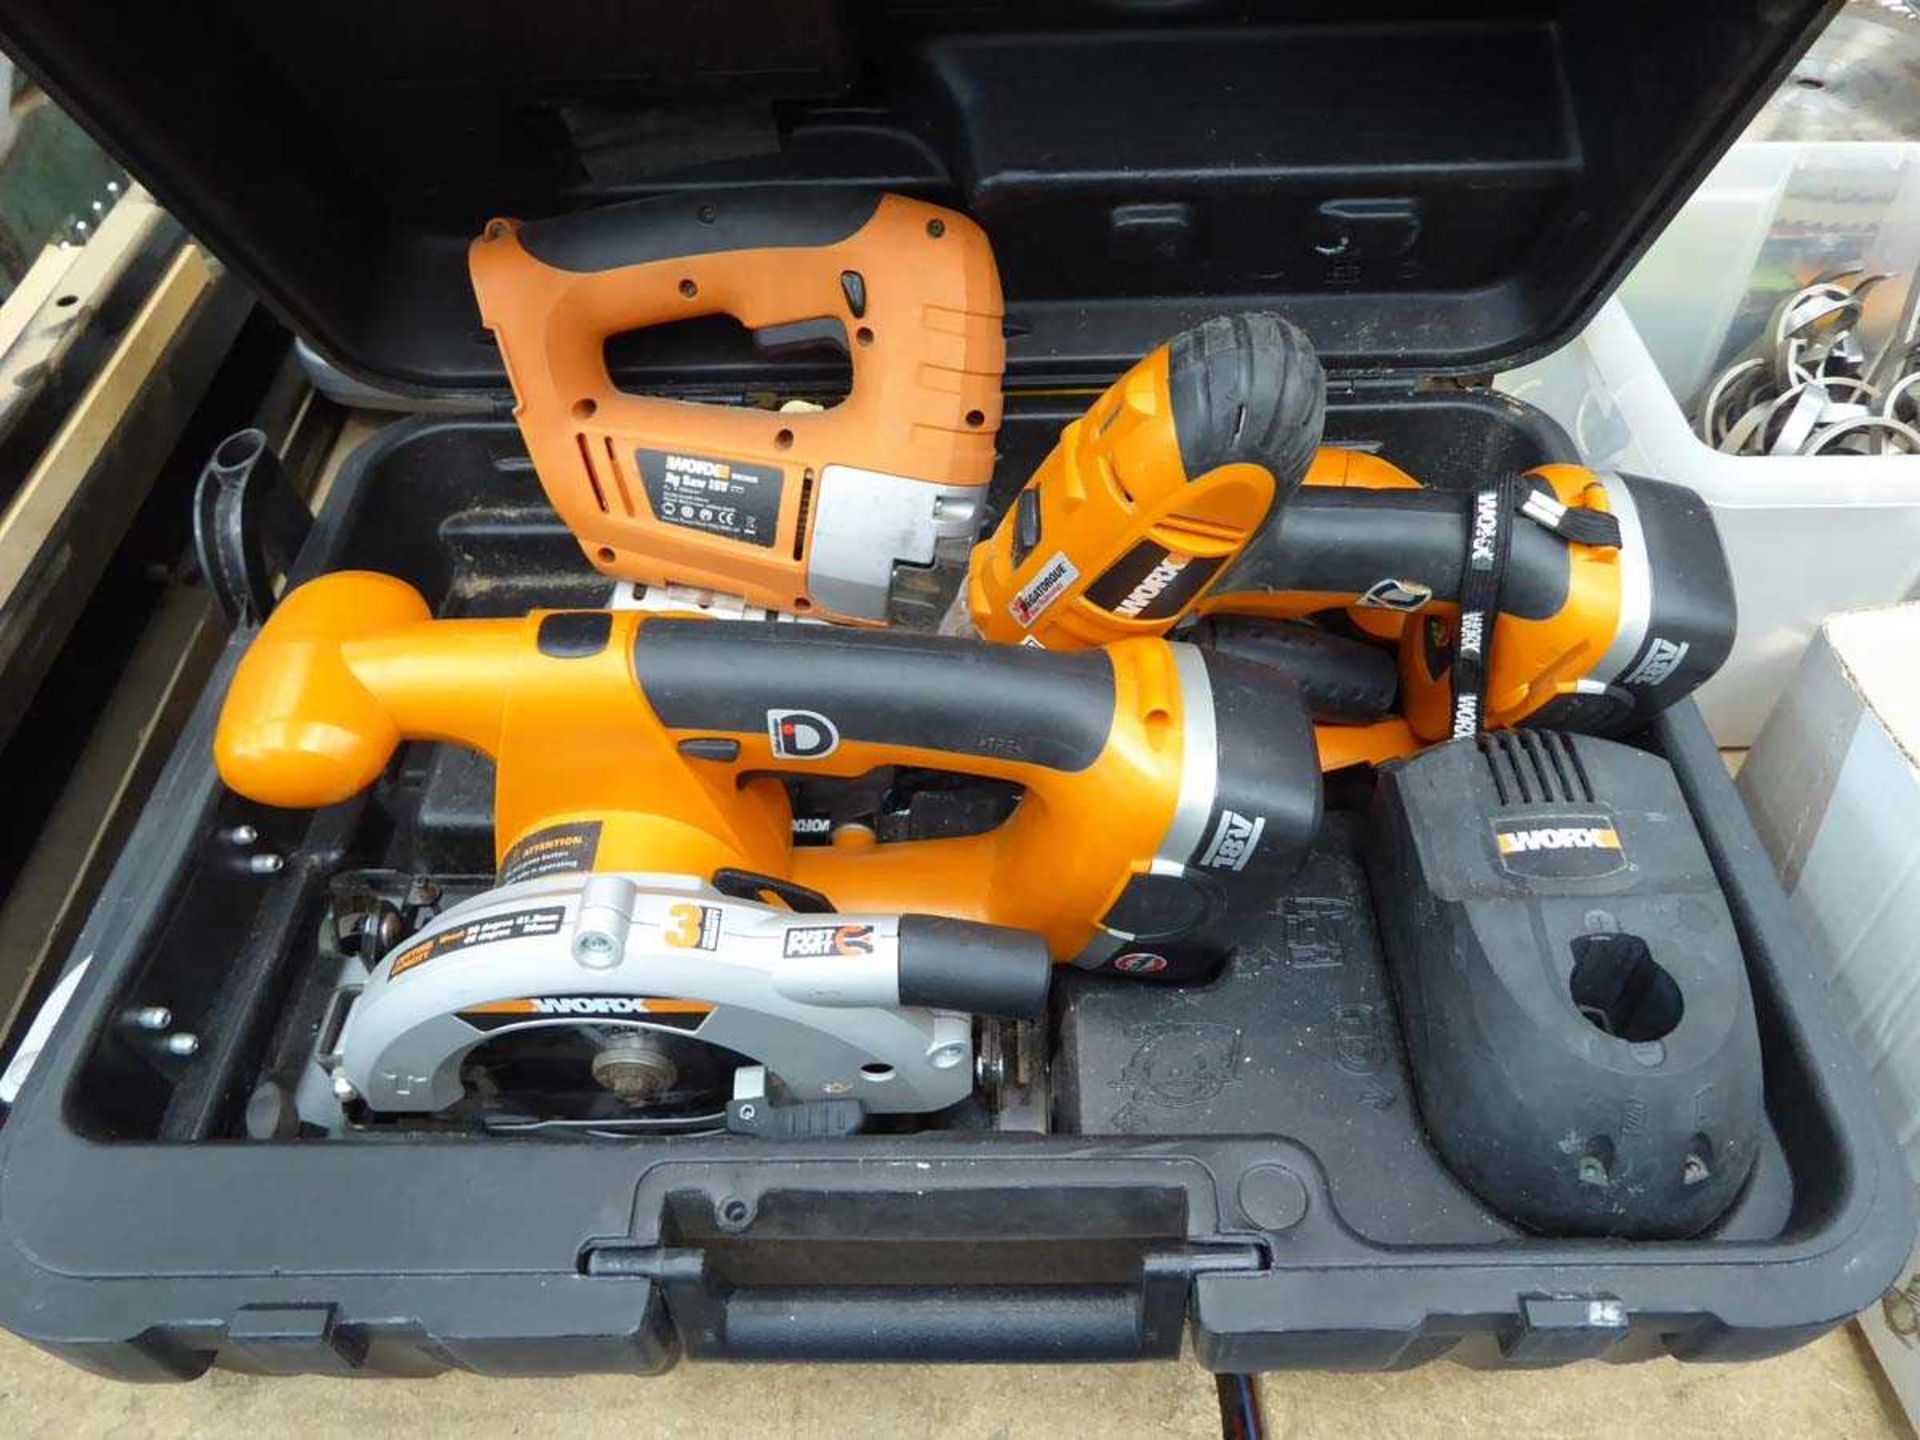 Worx multi toolbox with one battery and charger, to include drills, jigsaws, and circular saw